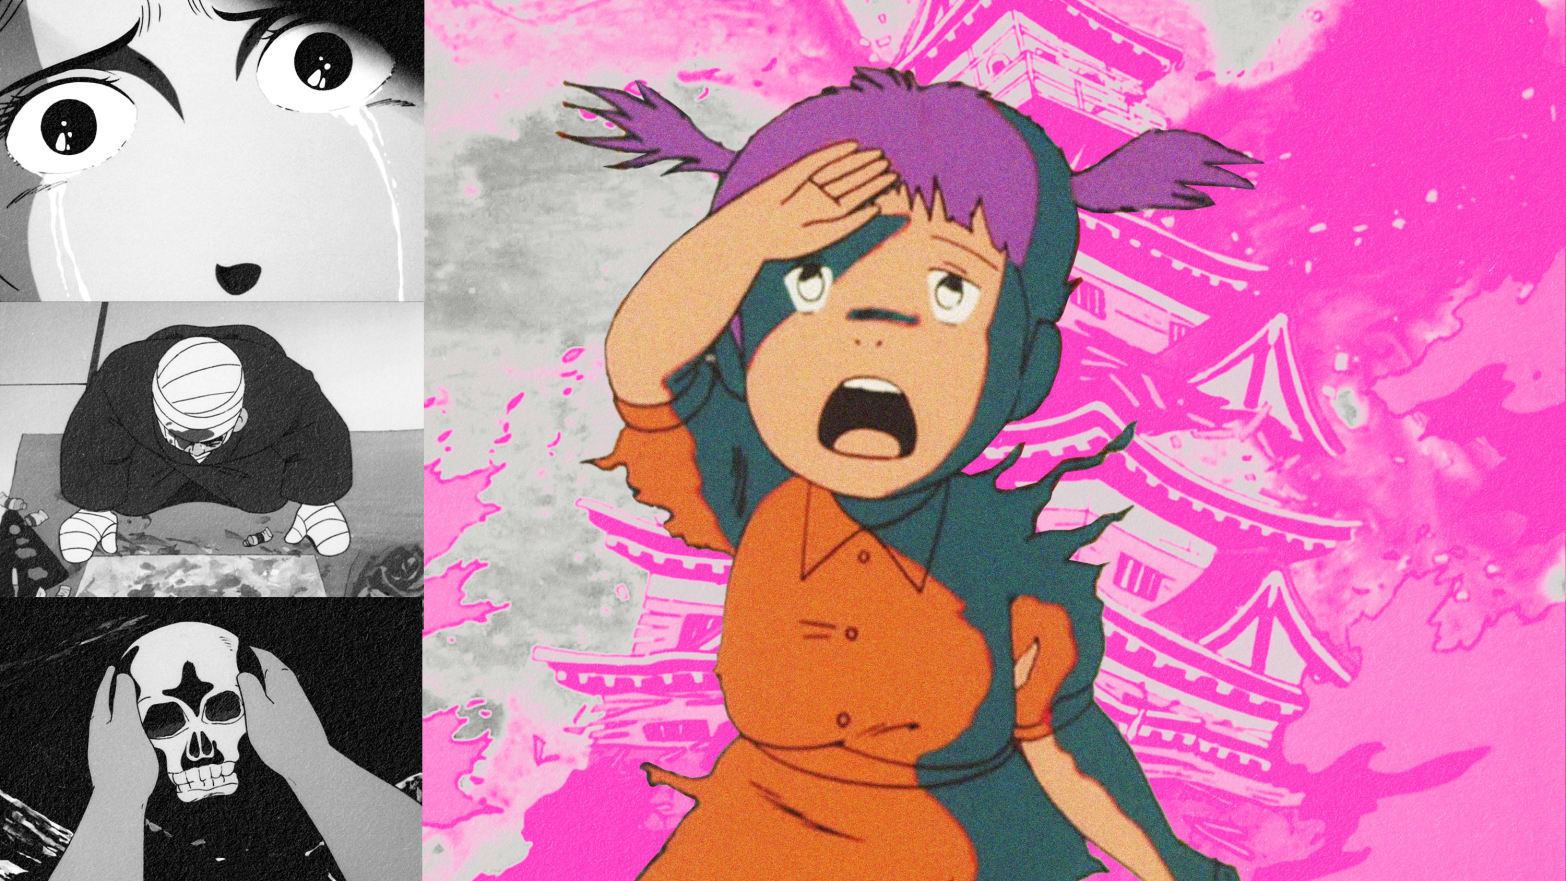 A photo illustration made up of stills from the movie Barefoot Gen